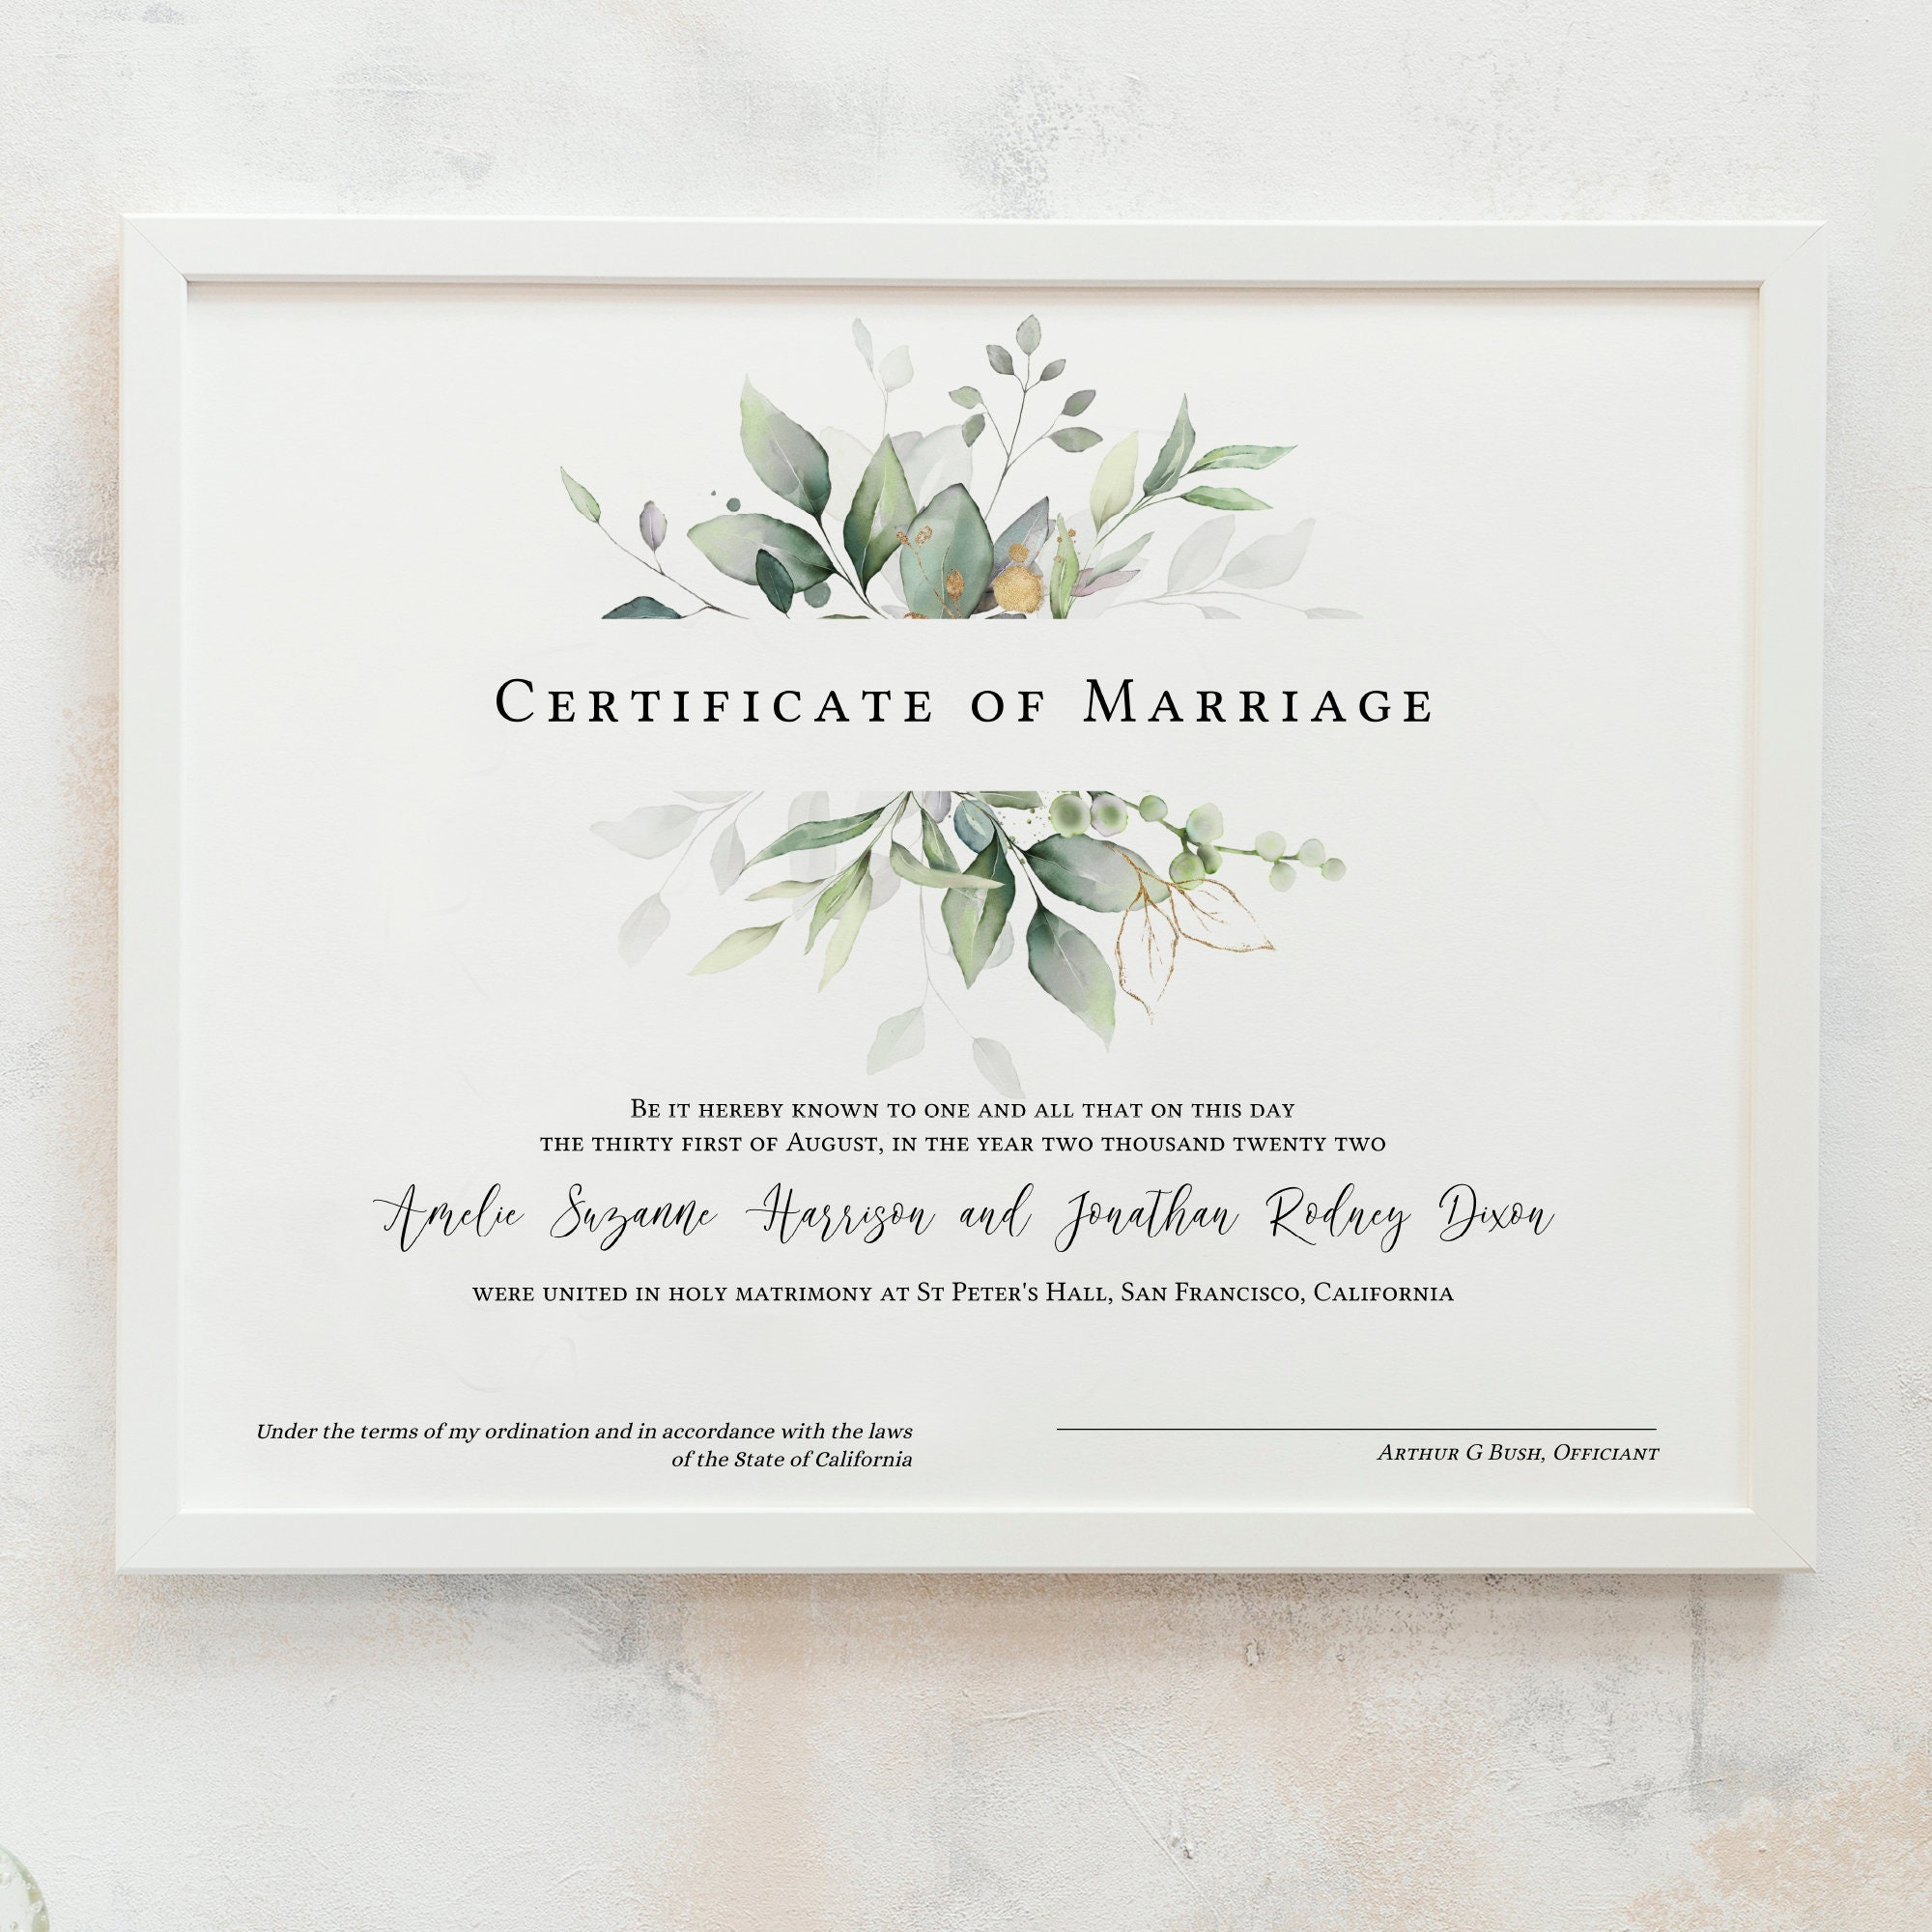 Marriage certificate template - Etsy